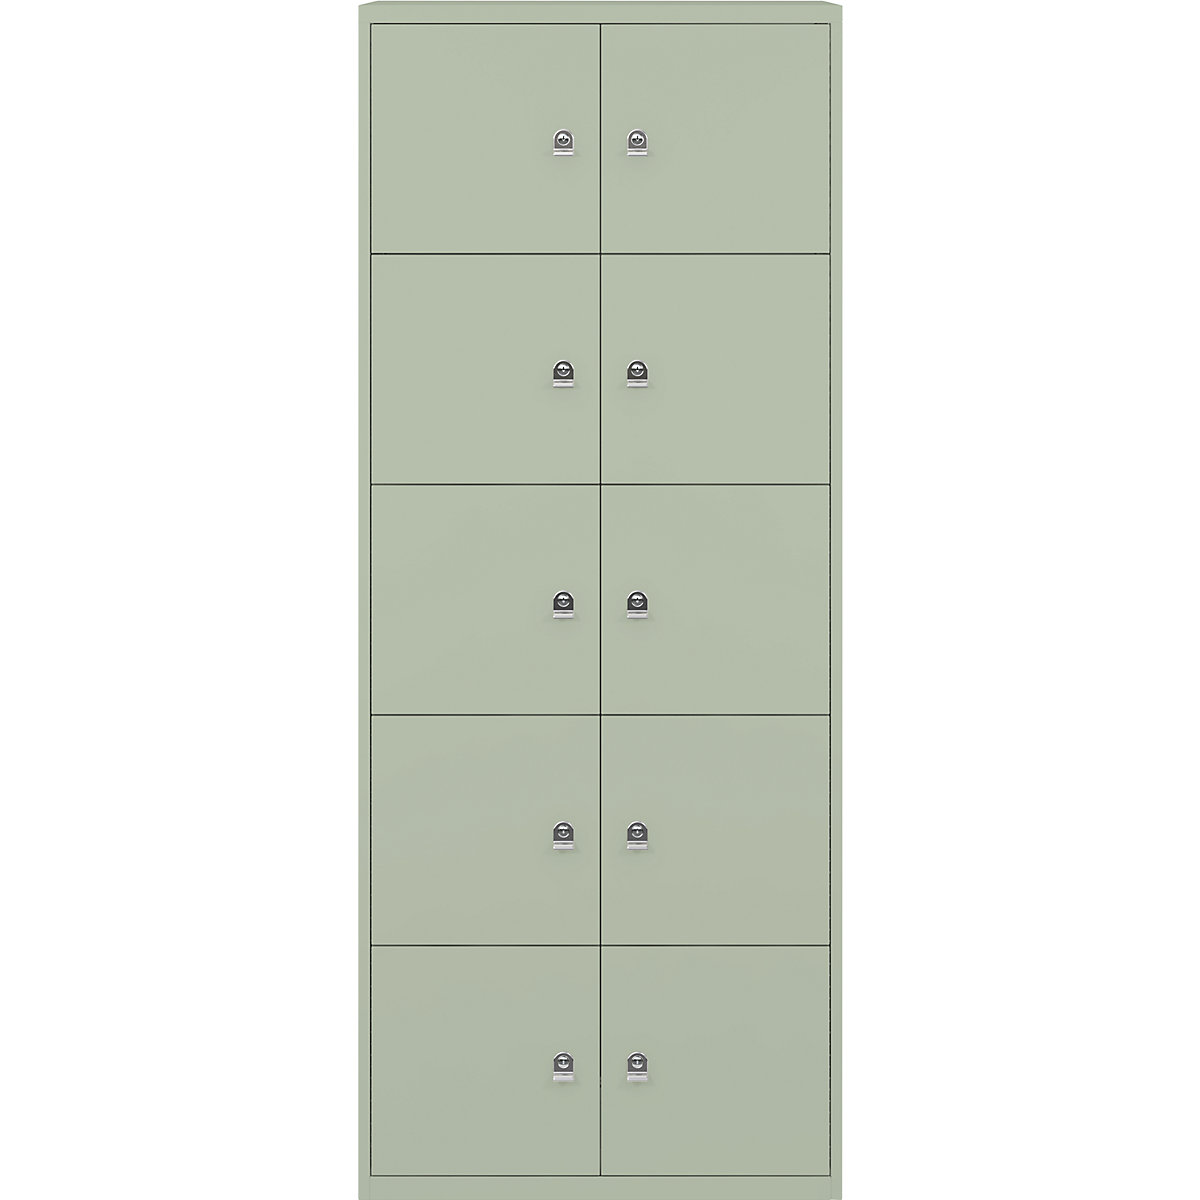 LateralFile™ lodge – BISLEY, with 10 lockable compartments, height 375 mm each, regent